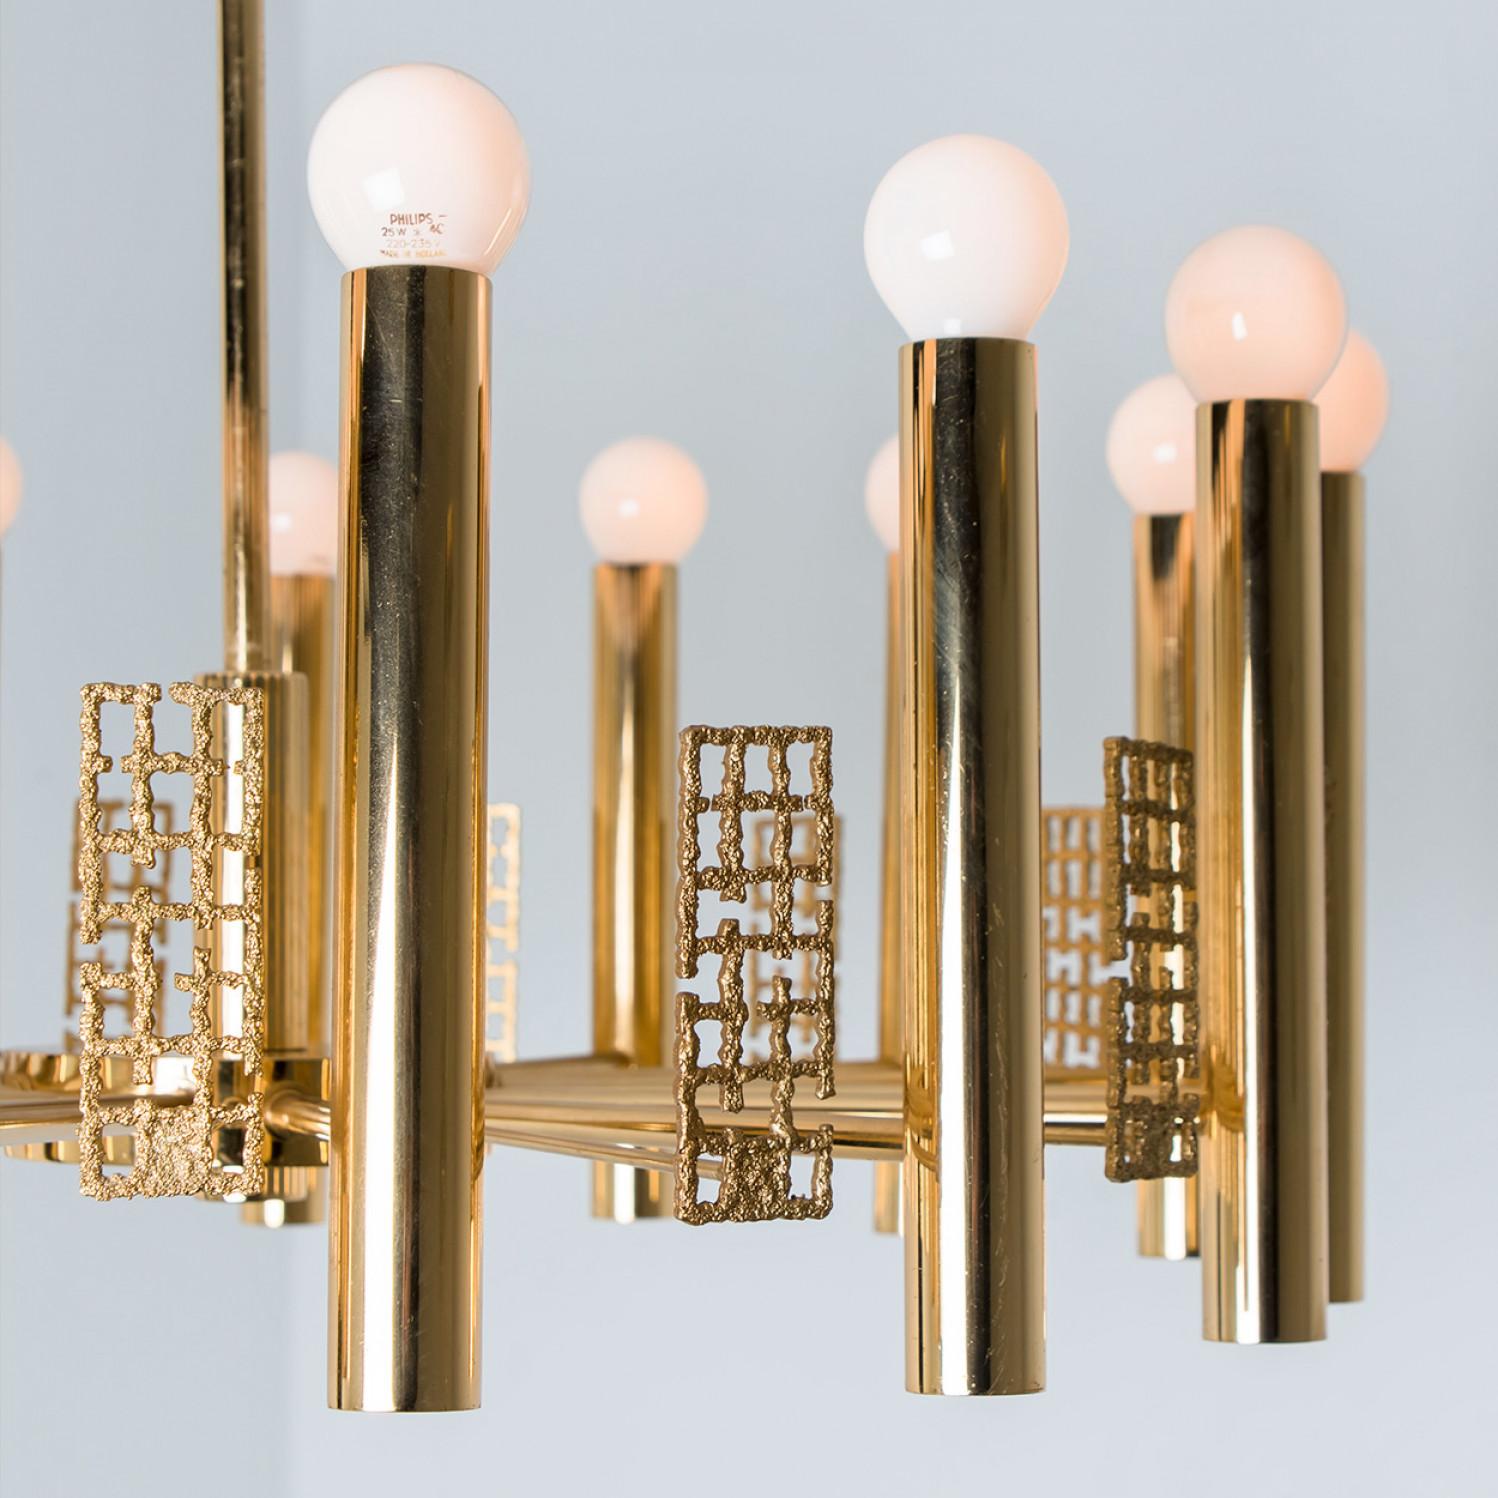 Gold and Brass Chandelier in Style of Sciolari, 1960 For Sale 4